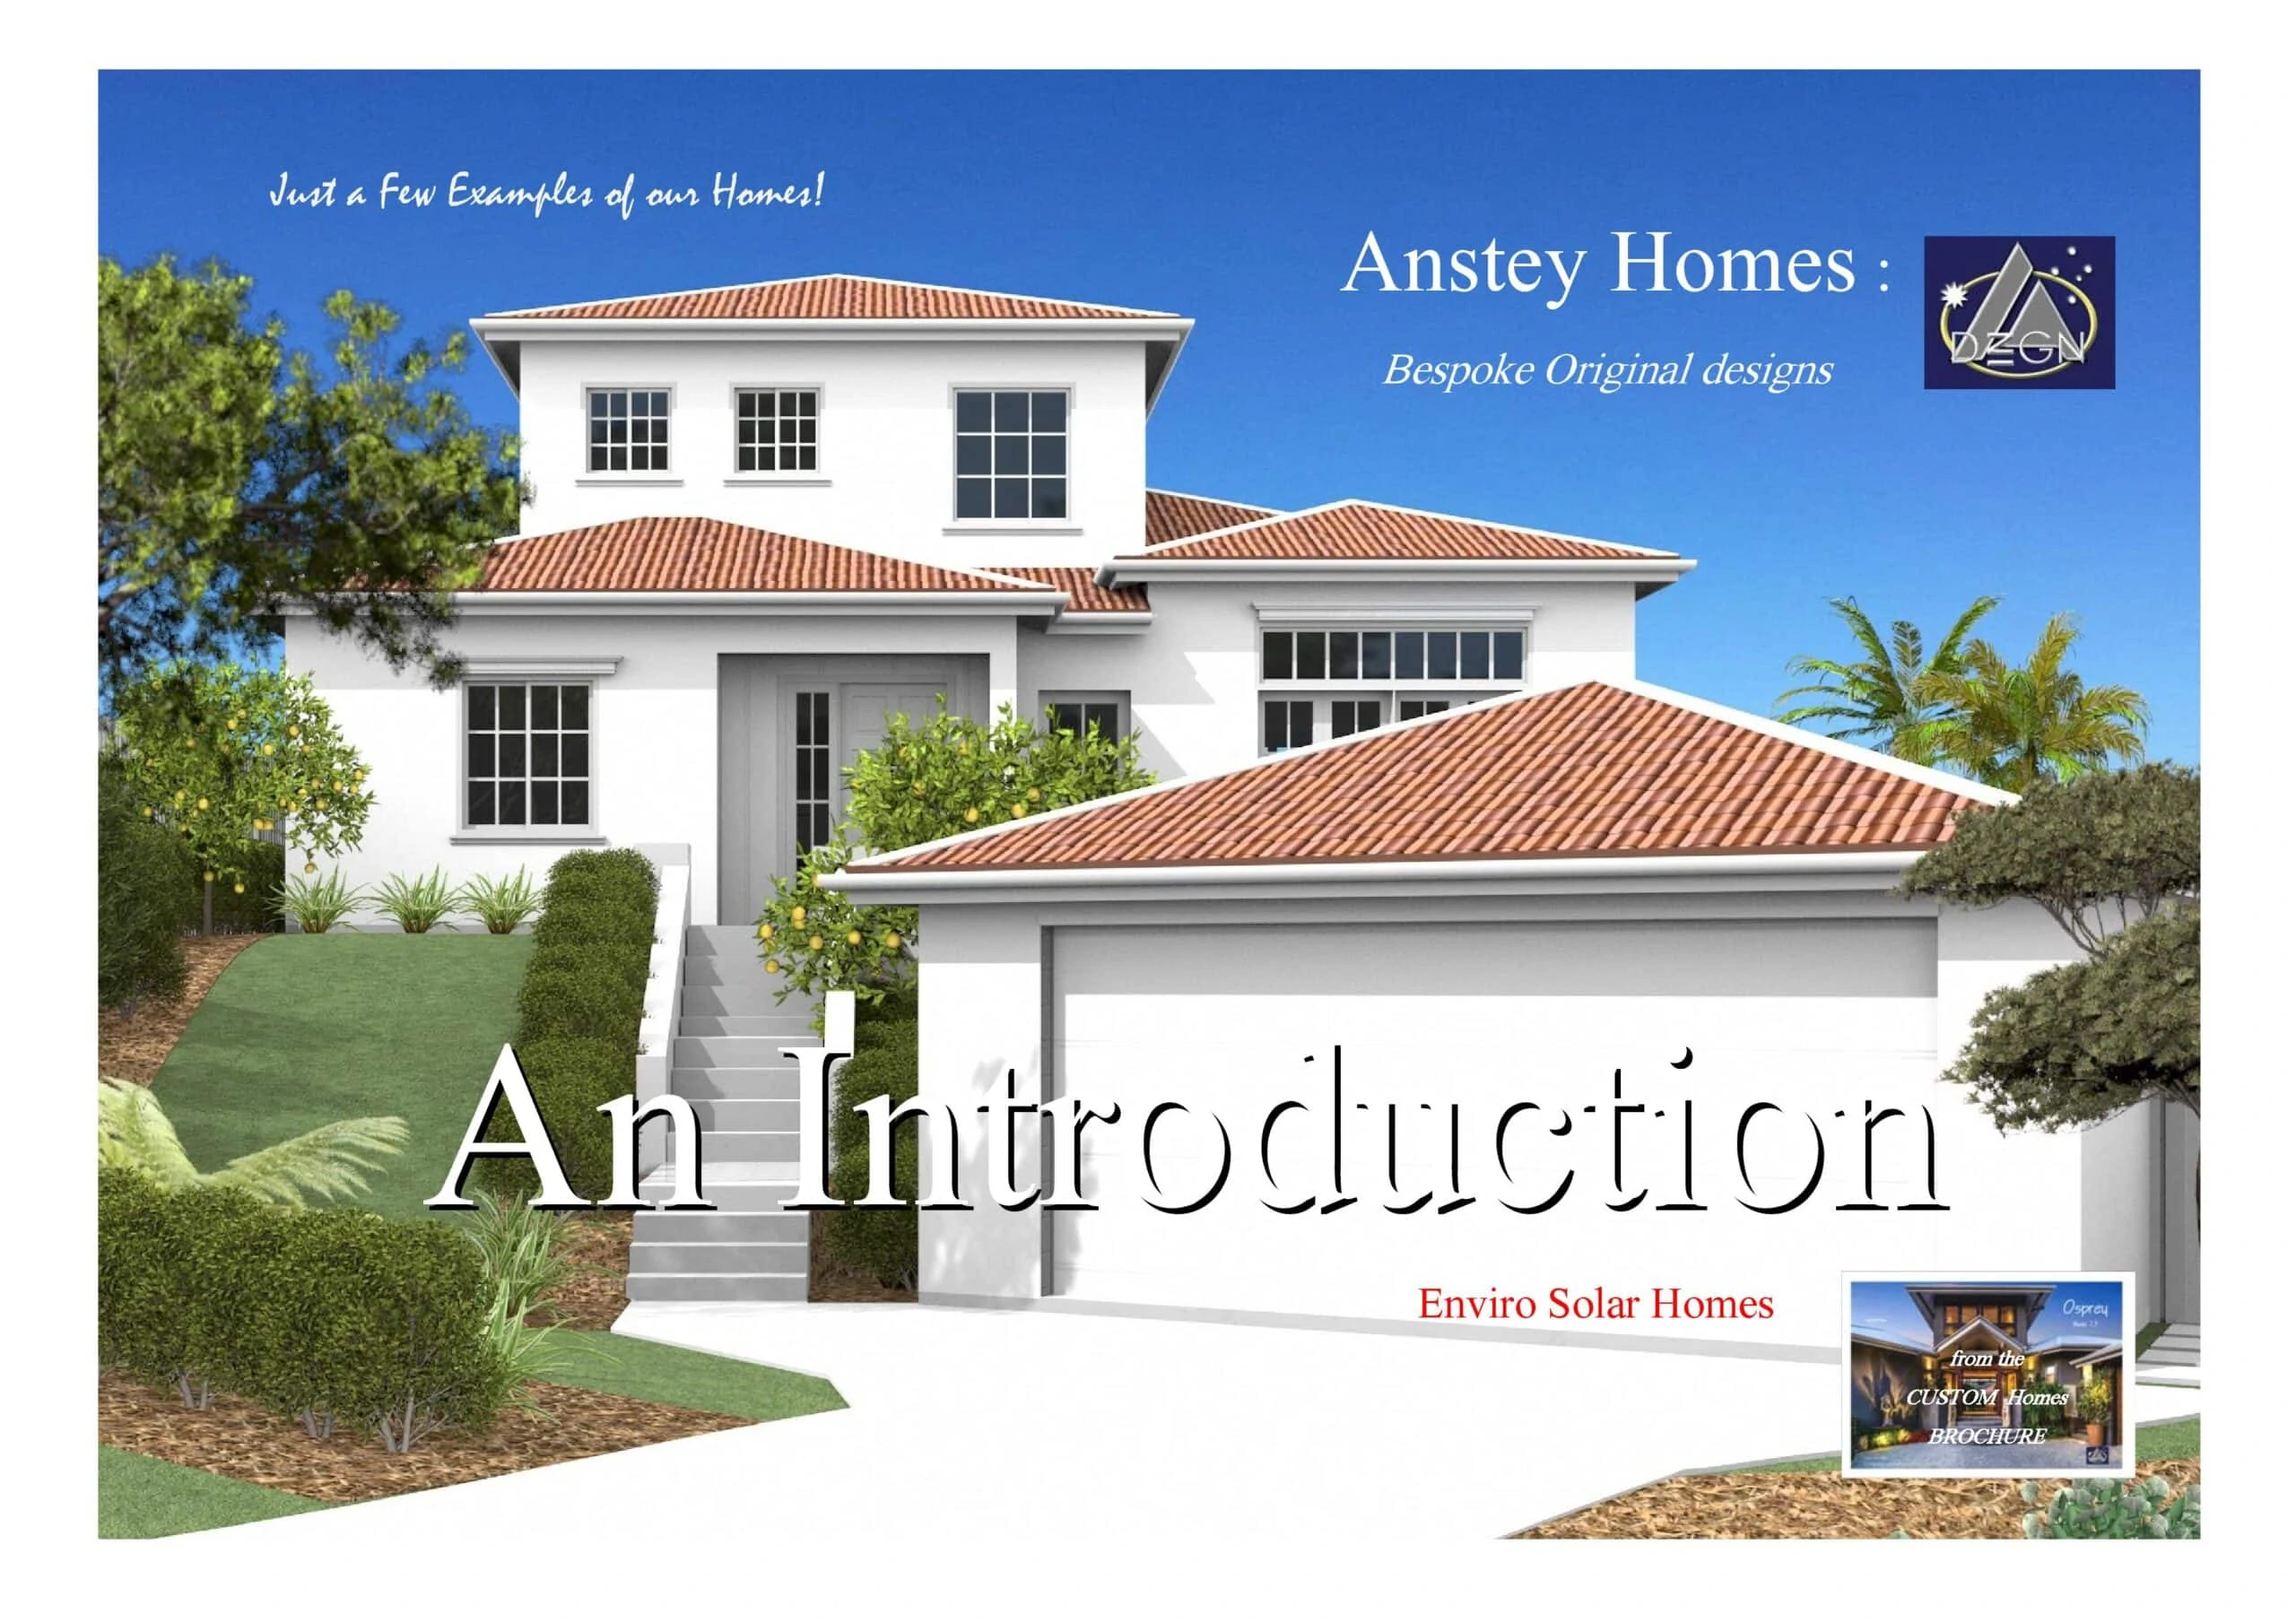 A Anstey Homes Introduction ADzGN-page-001